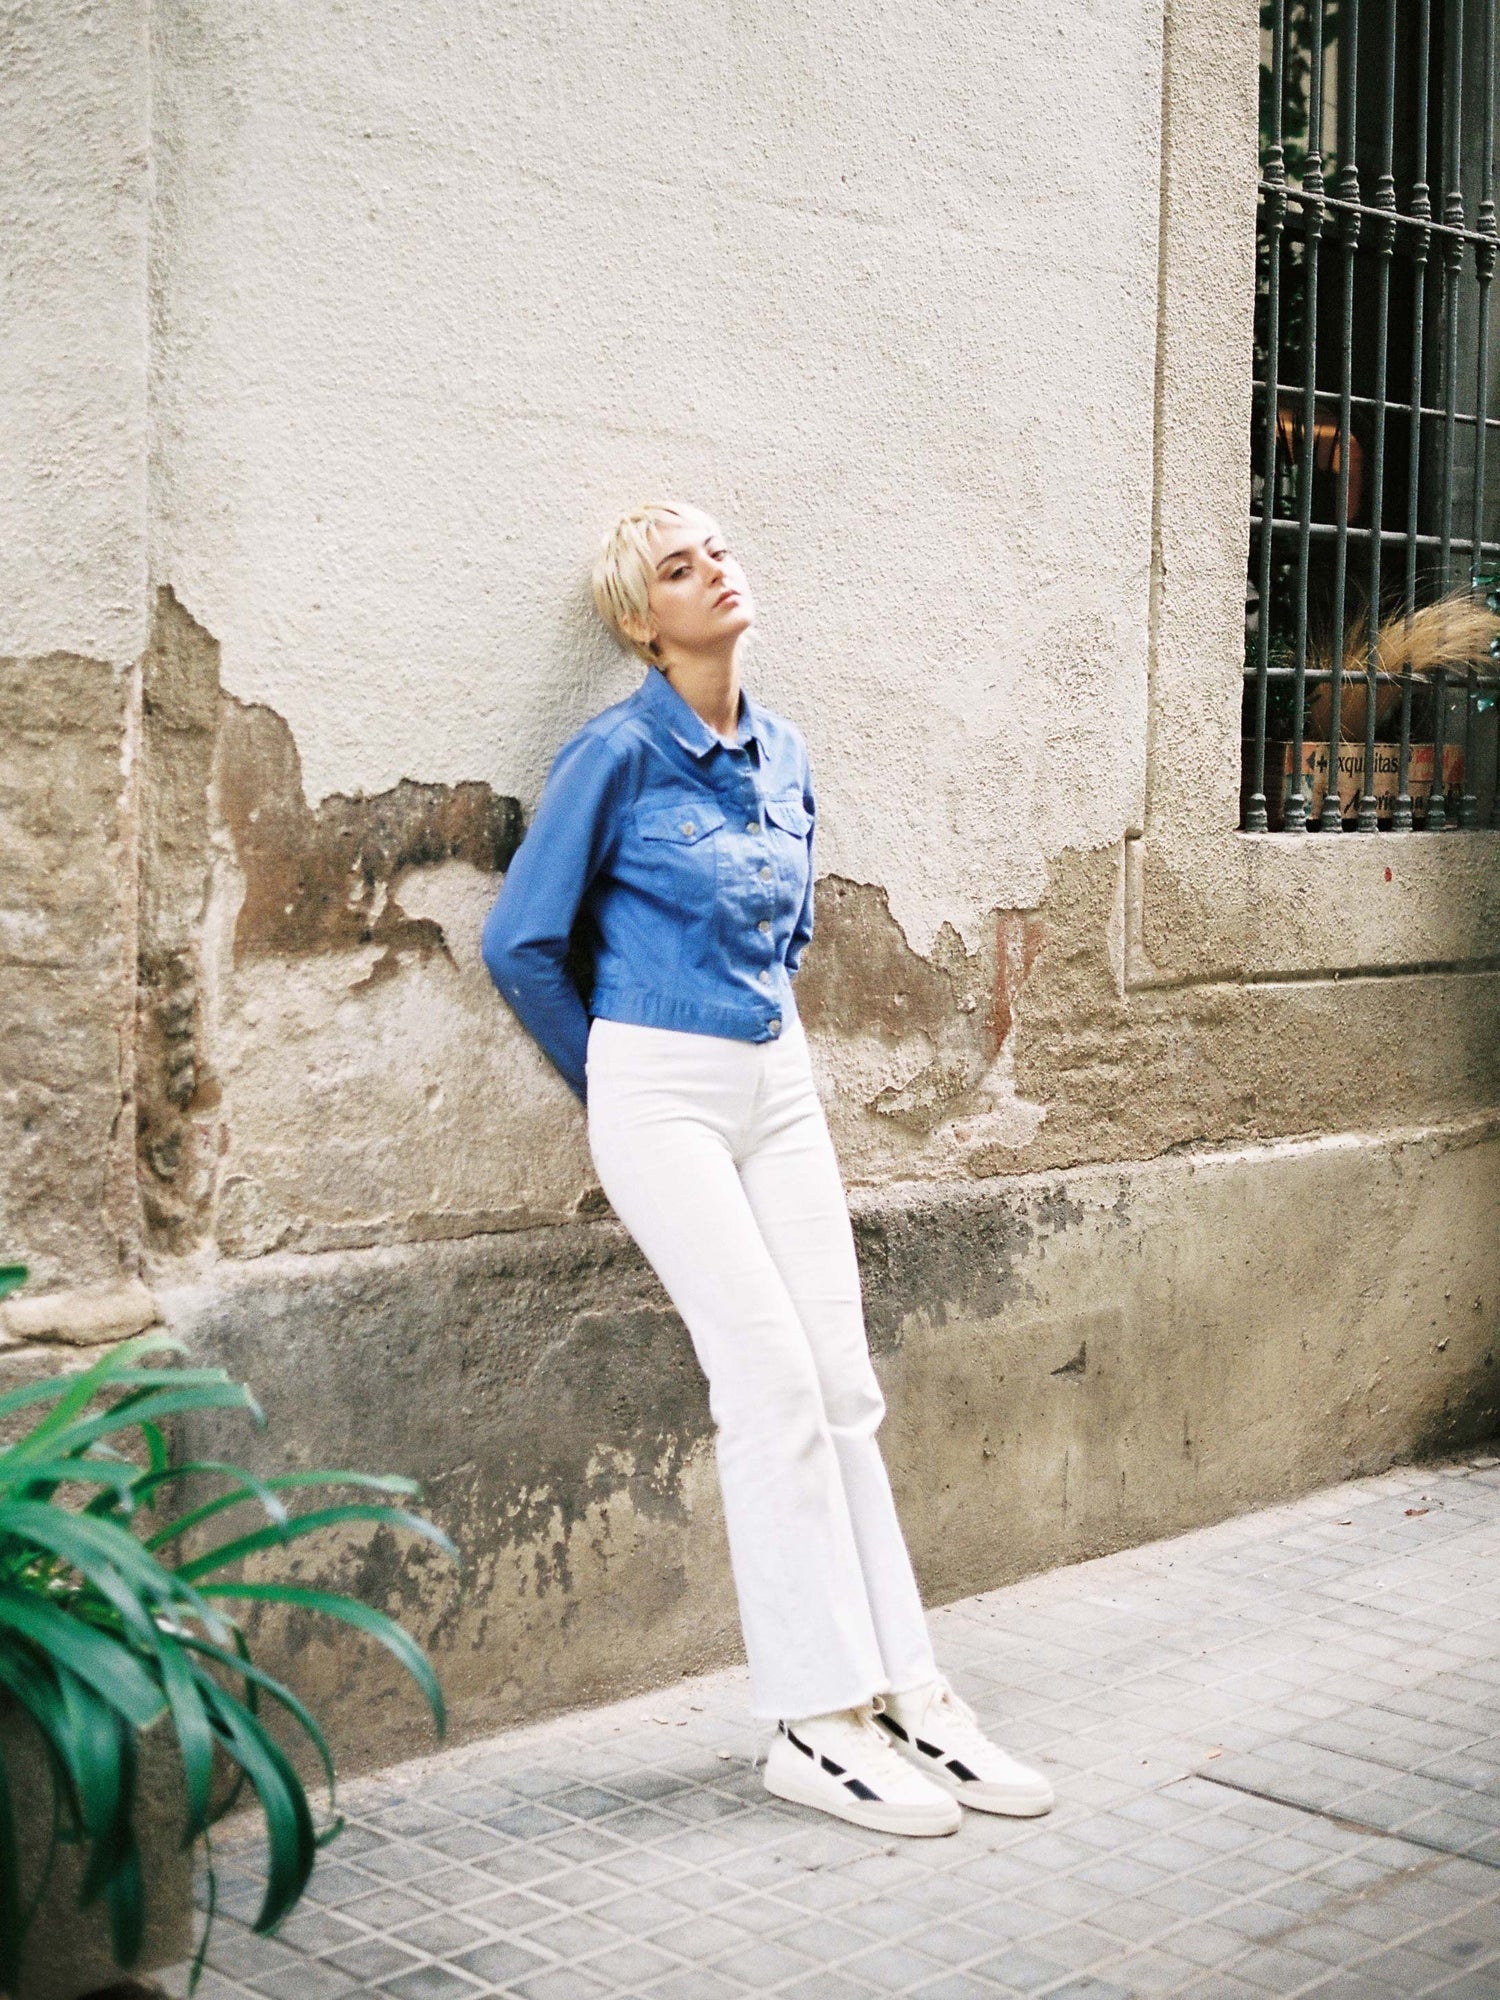 A woman leaning against a wall wearing white pants and a blue shirt made from SAYE's Modelo '89 Hi Sneakers - Black.